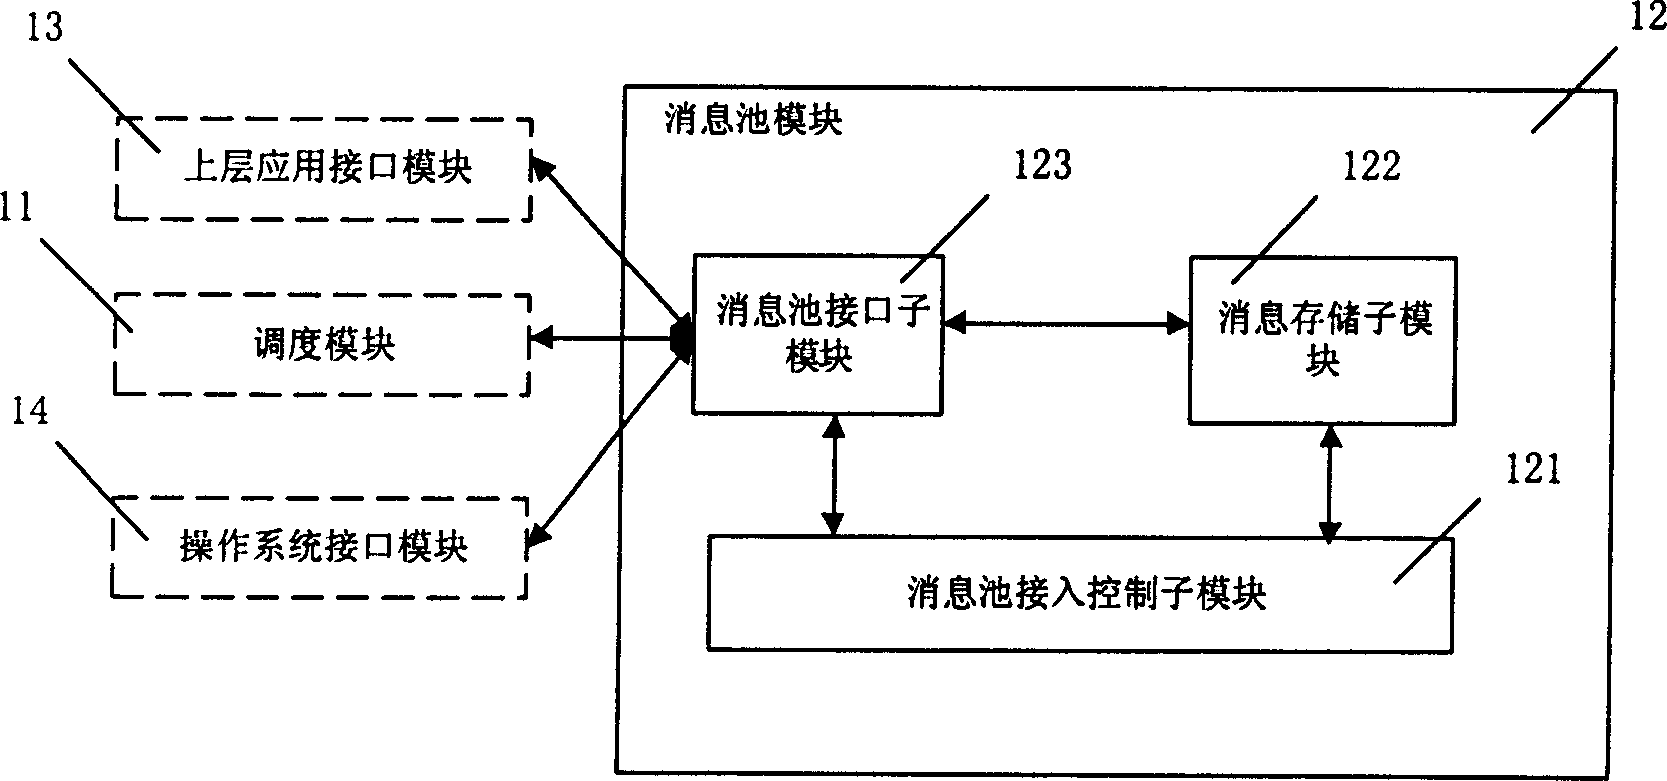 Channel scheduling device based on operation system in embedded system